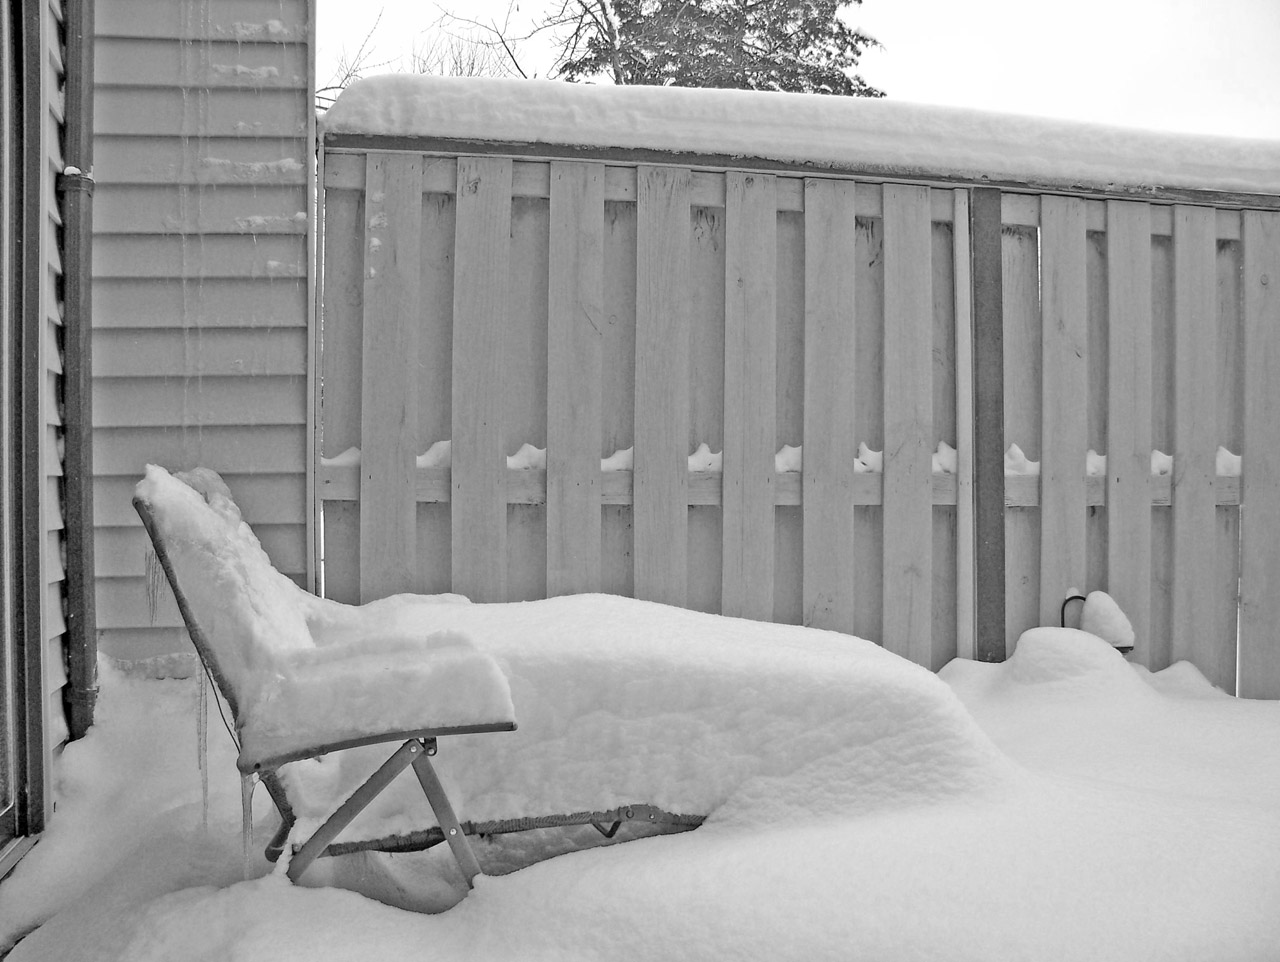 Snow On Lawn Chair